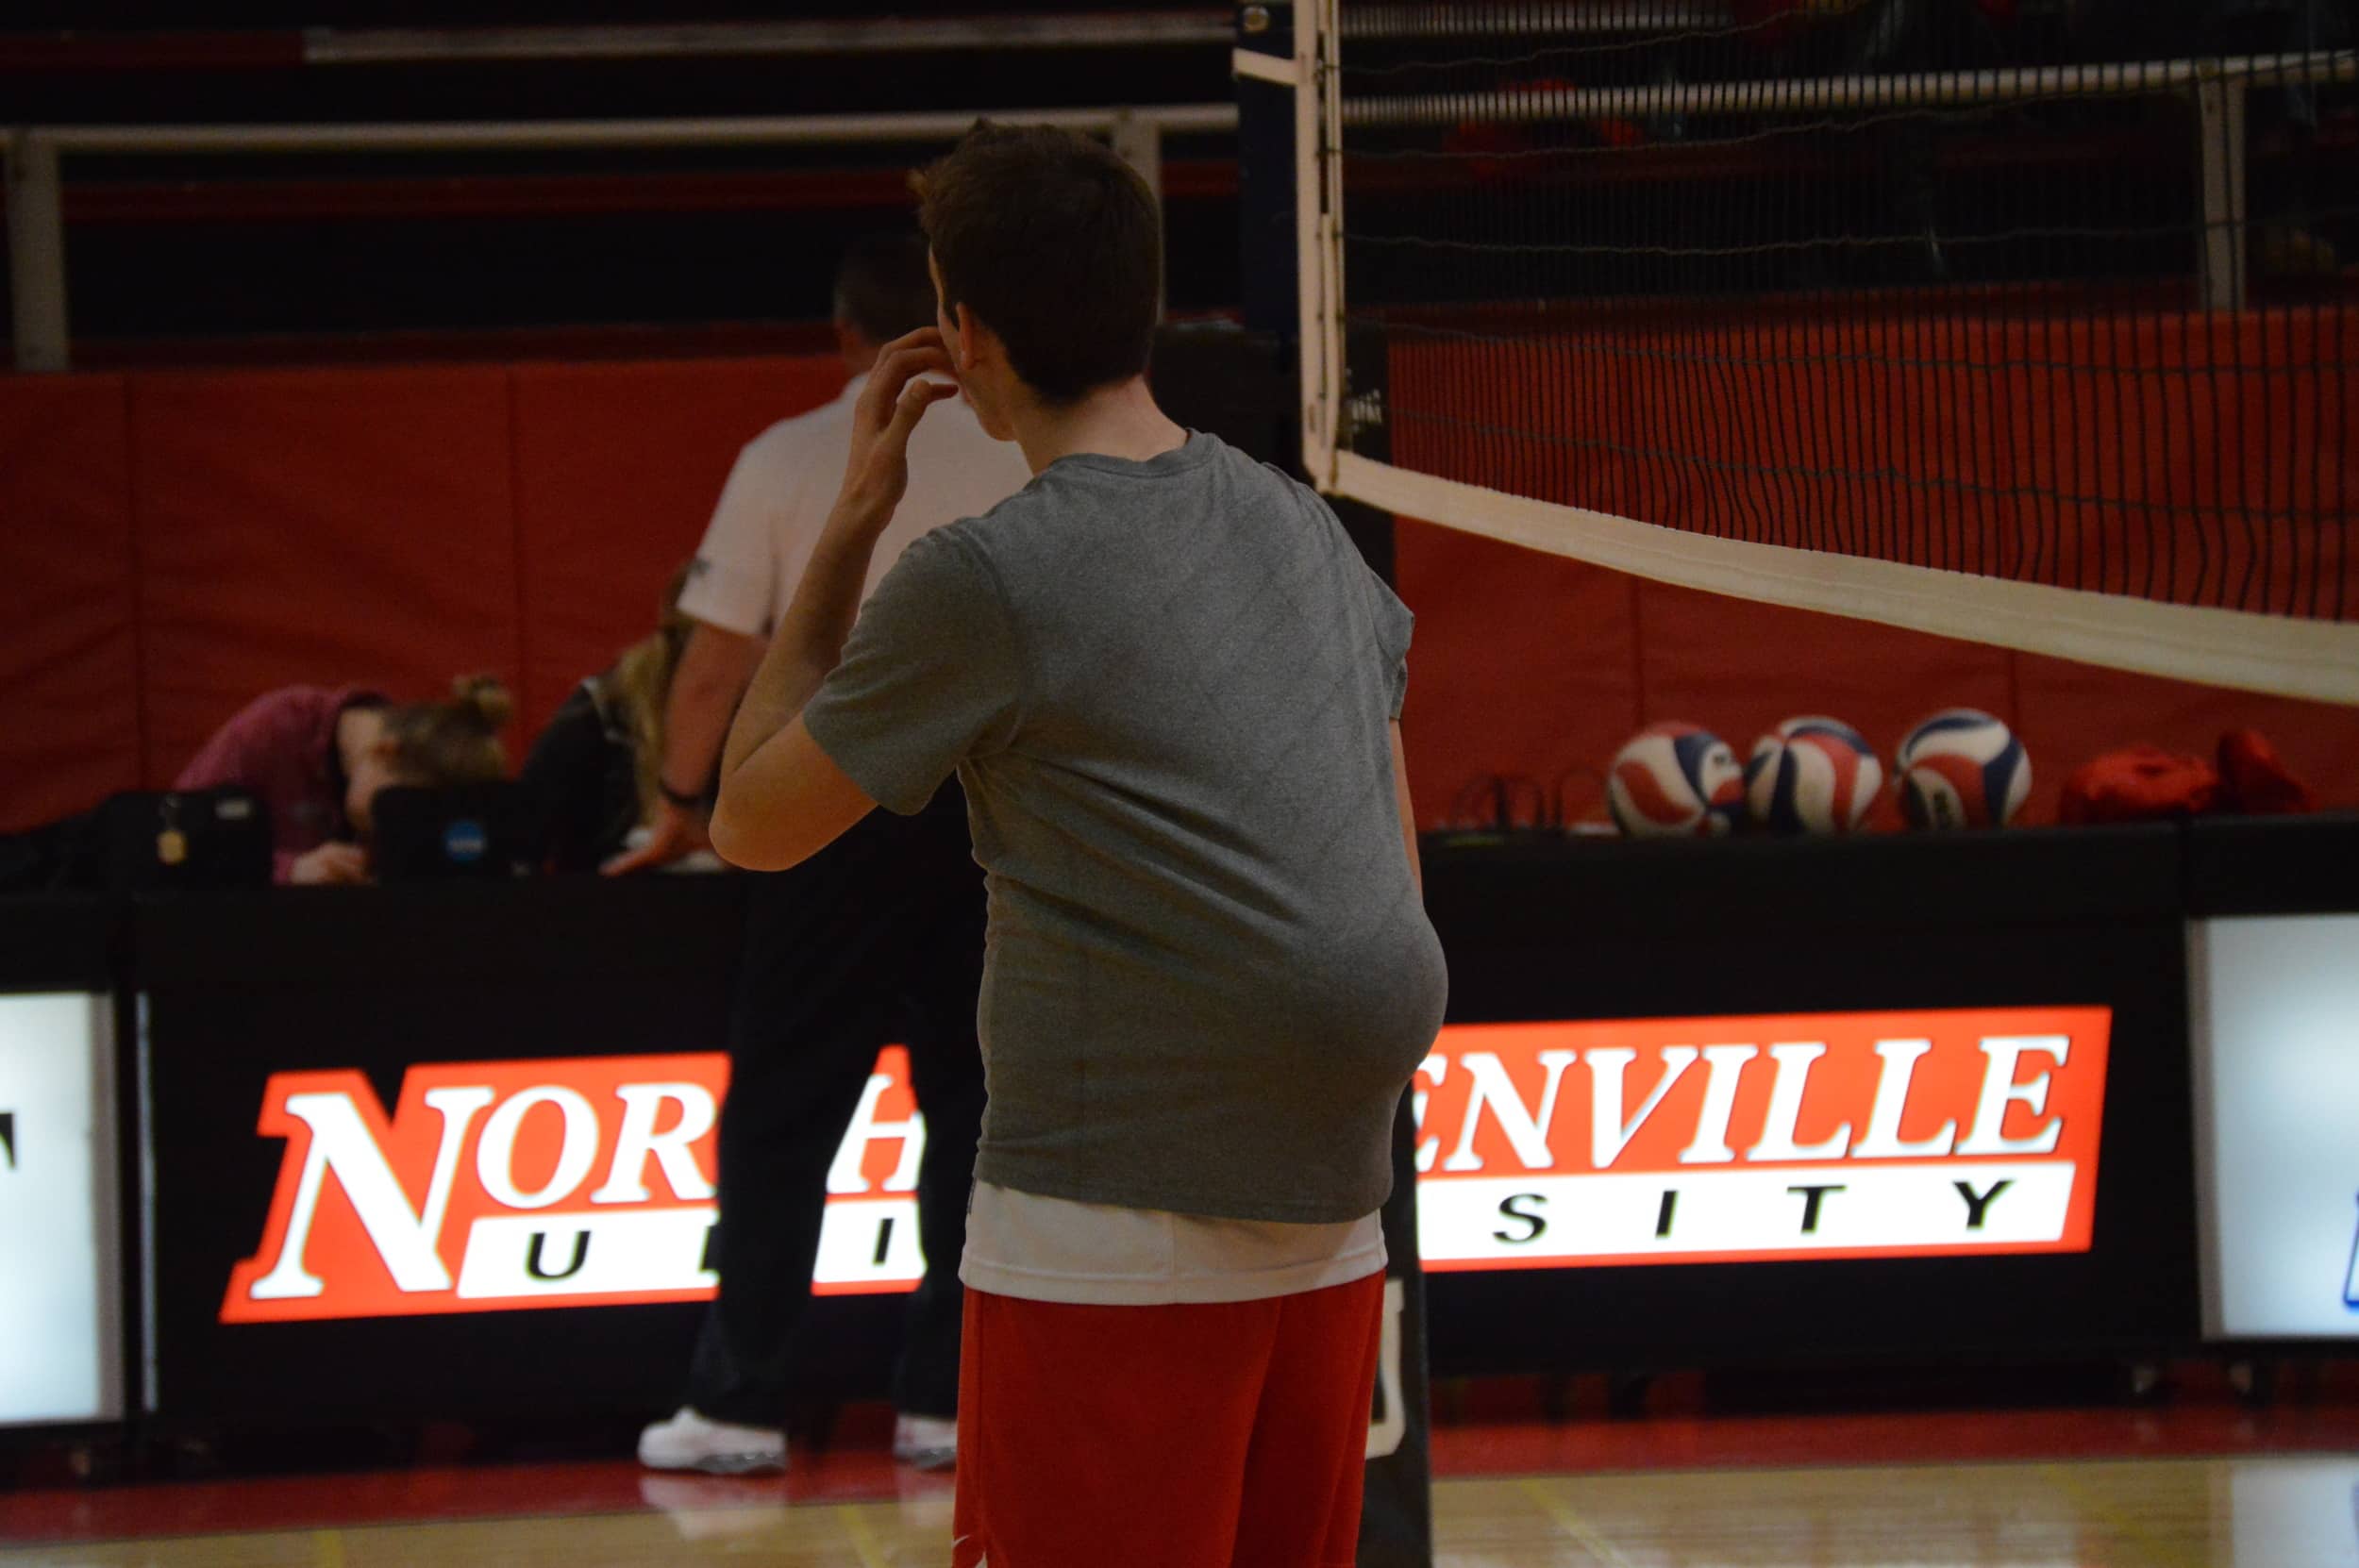 Putting a volleyball in his shirt, Grayson Lawrence has a little fun on the court.